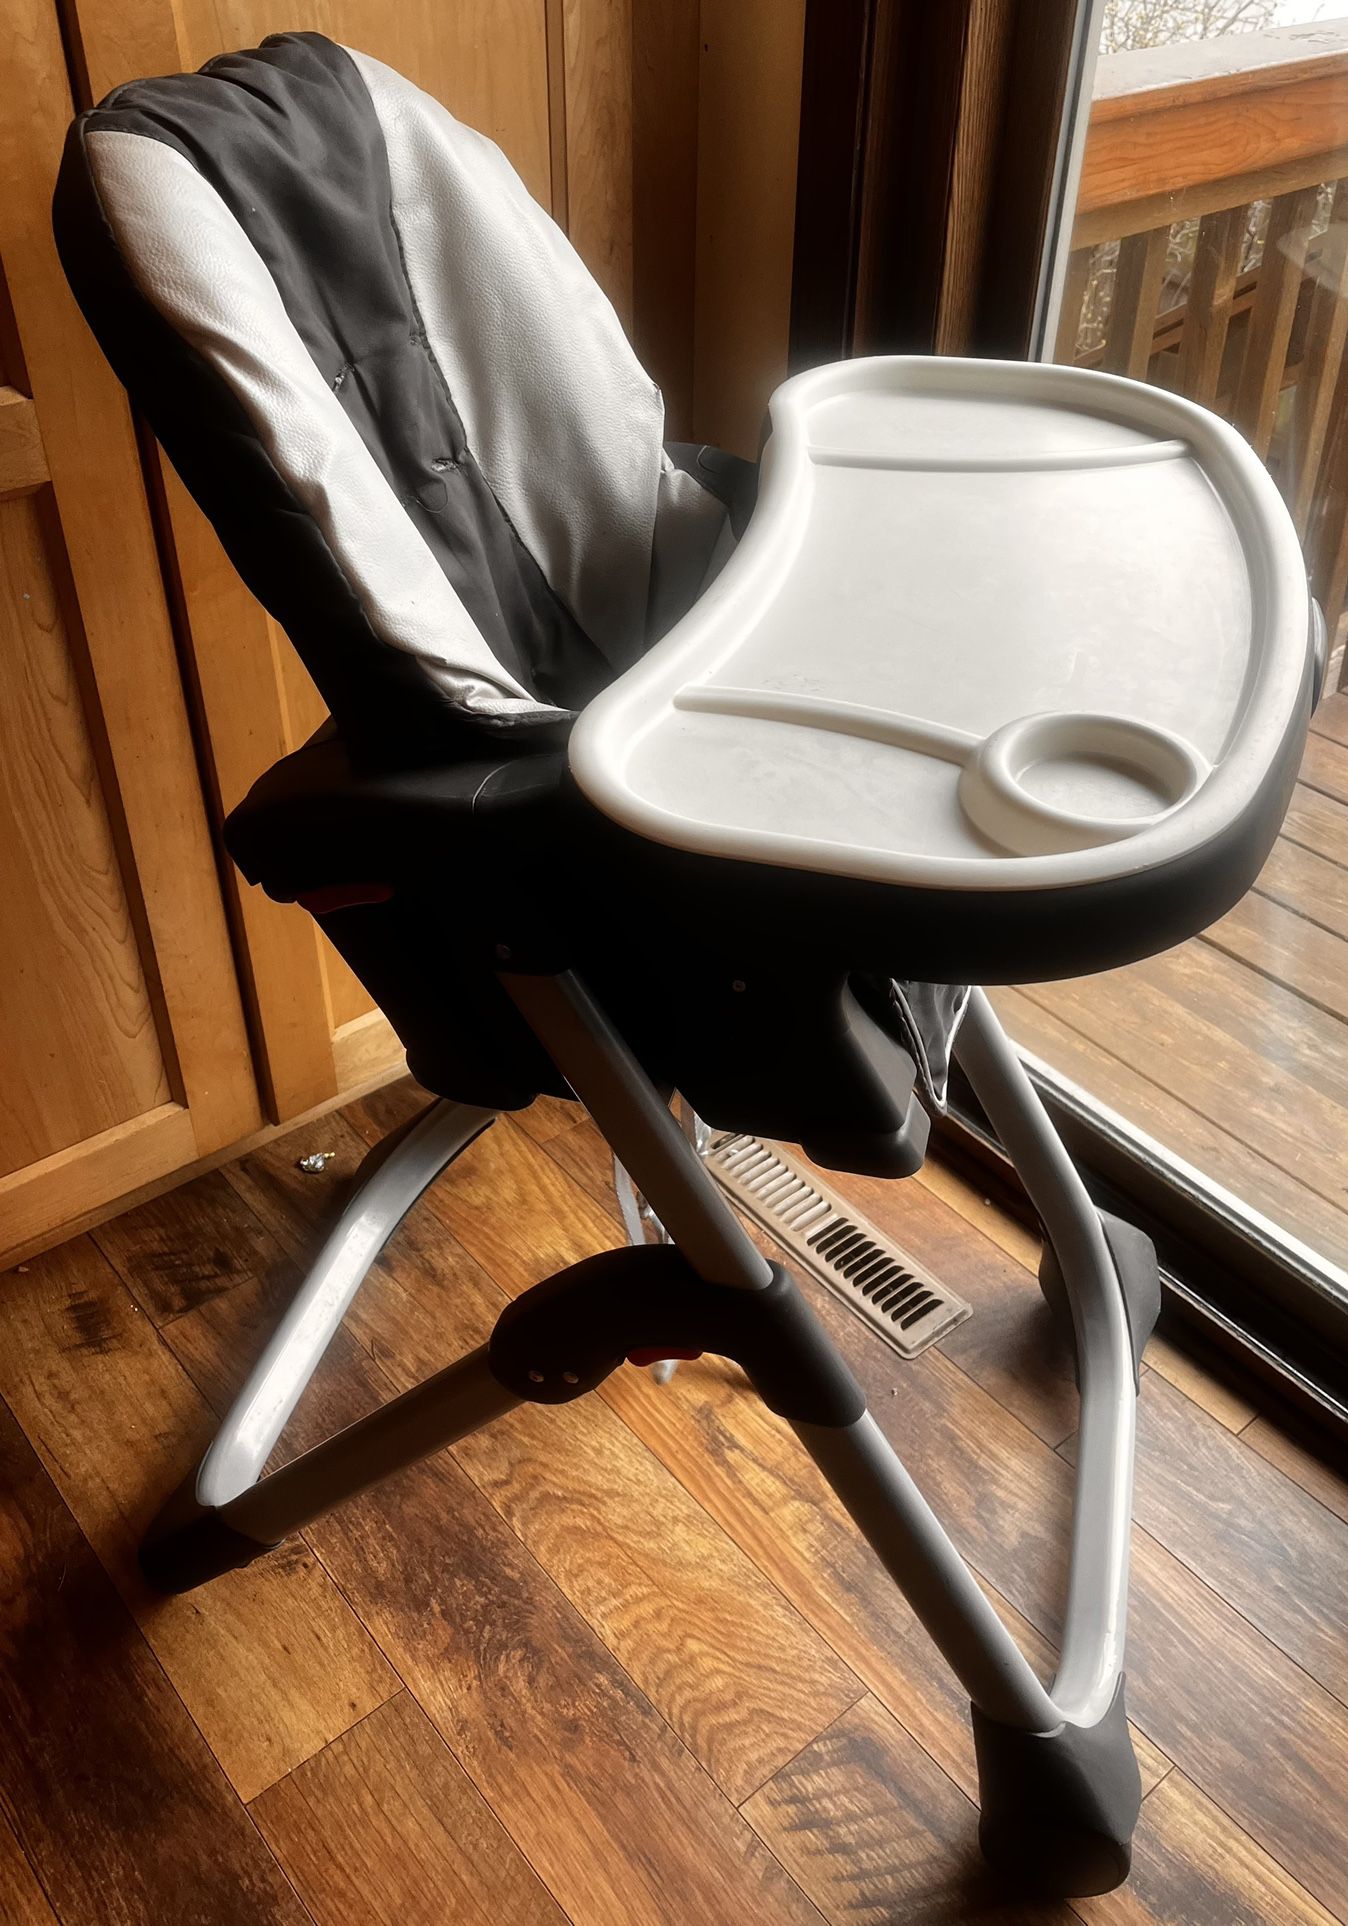 Graco® Blossom 6-in-1 Convertible Highchair